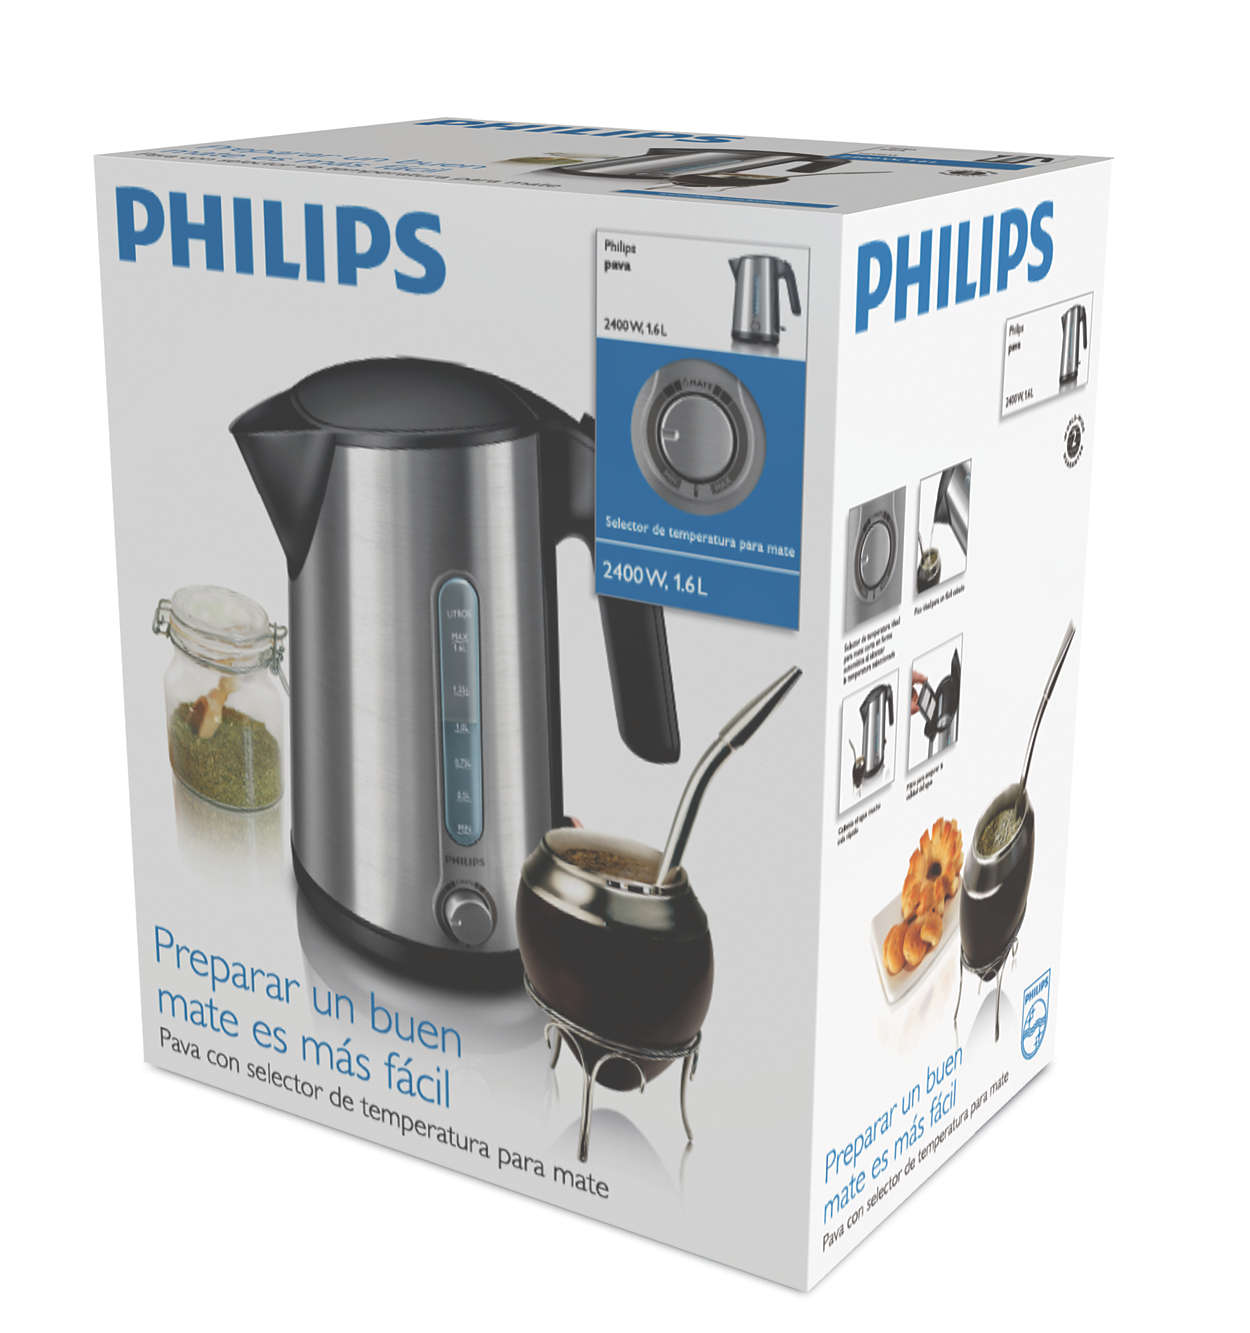 https://images.philips.com/is/image/philipsconsumer/9381dbe4461a475f9b1dad1900c65961?$jpglarge$&wid=1250